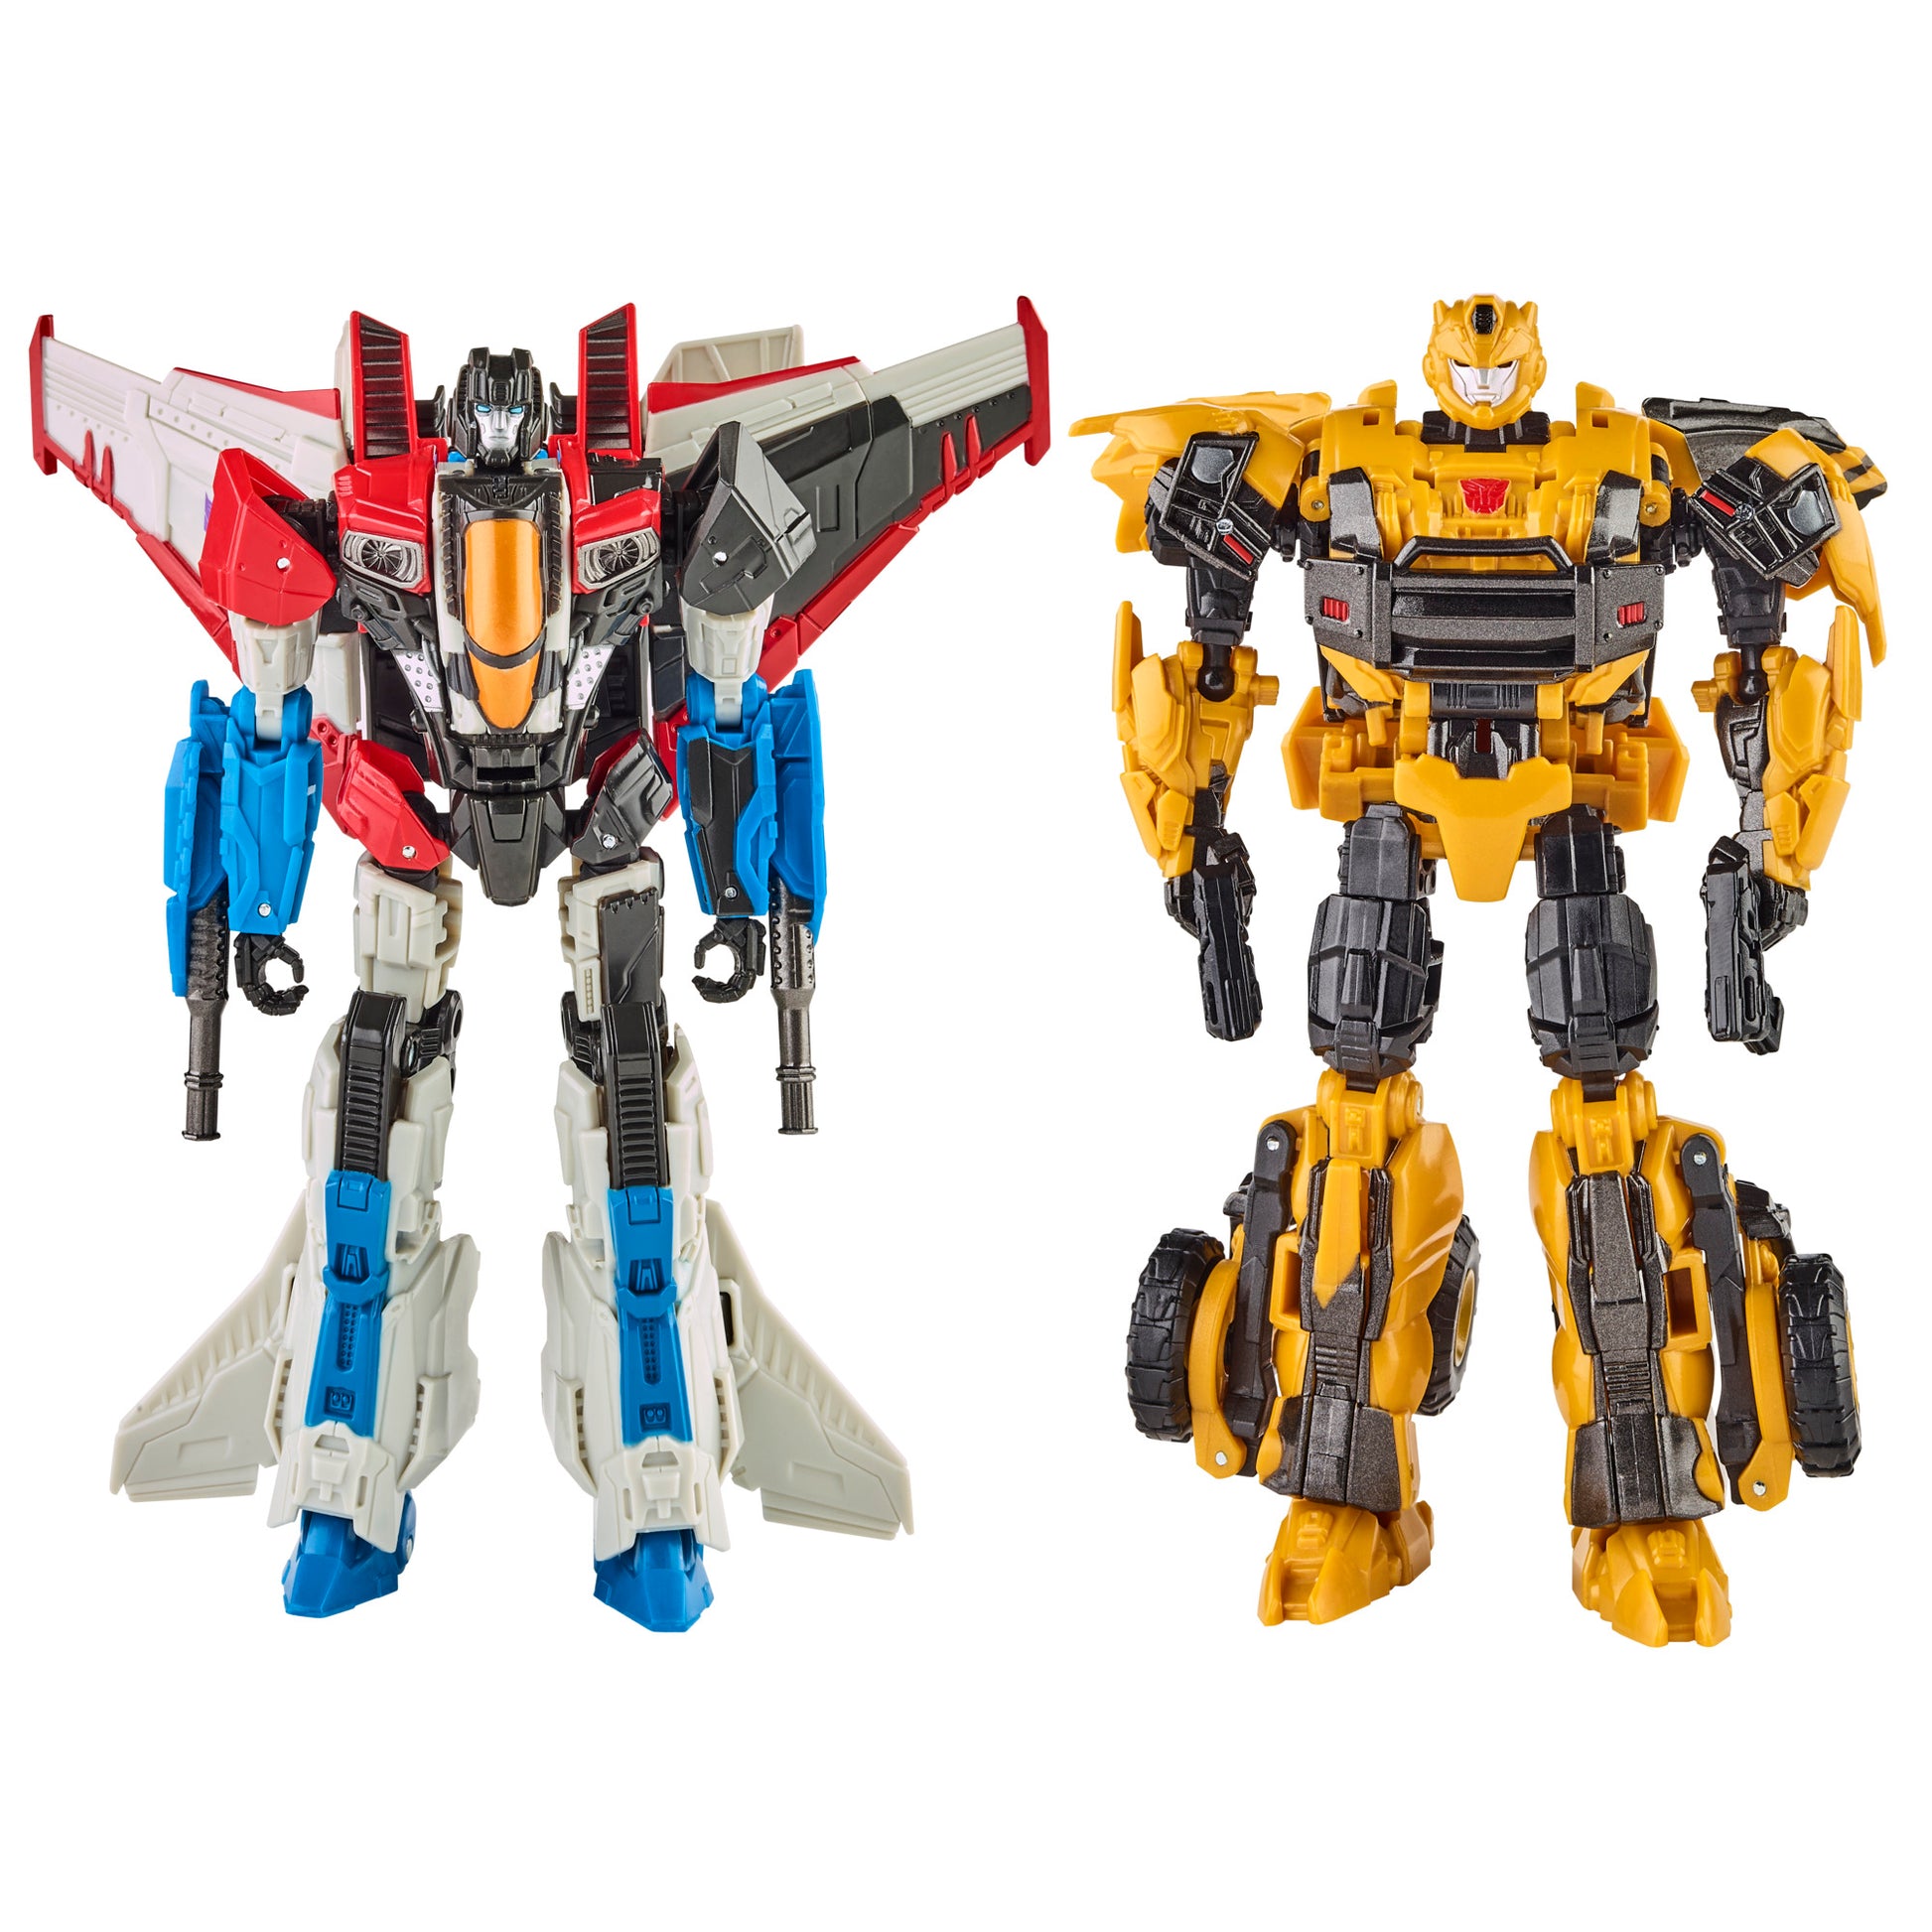 Transformers: Reactivate Video Game-Inspired Bumblebee and Starscream Action Figures - HERETOSERVEYOU